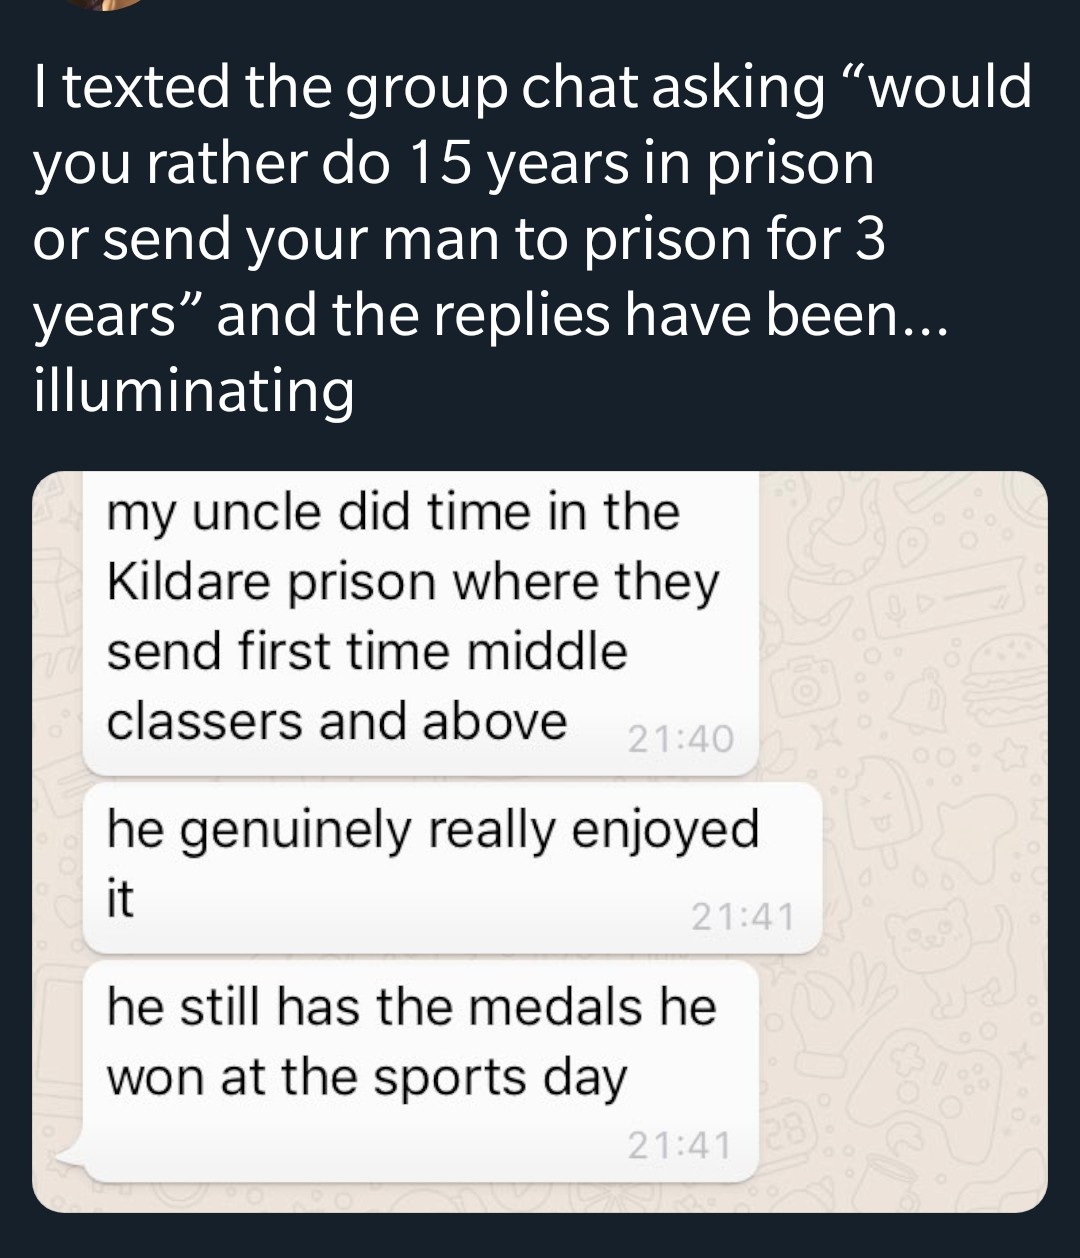 dank meme document - I texted the group chat asking would you rather do 15 years in prison or send your man to prison for 3 years and the replies have been... illuminating my uncle did time in the Kildare prison where they send first time middle classers 